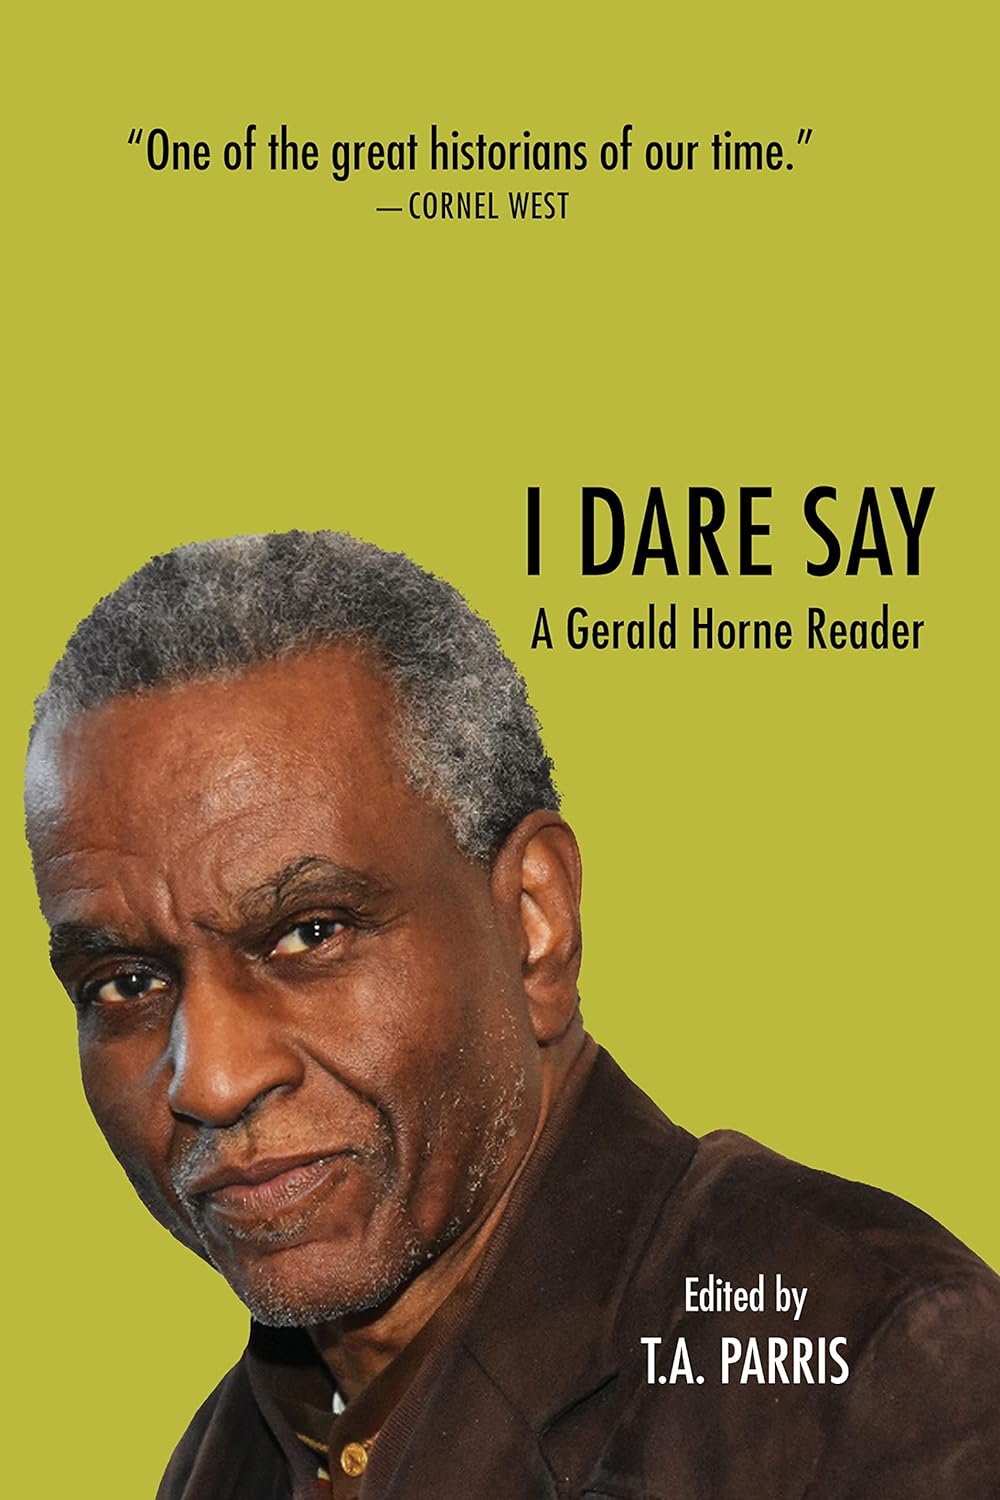 I Dare Say: A Gerald Horne Reader by Gerald Horne and Tionne Alliyah Parris